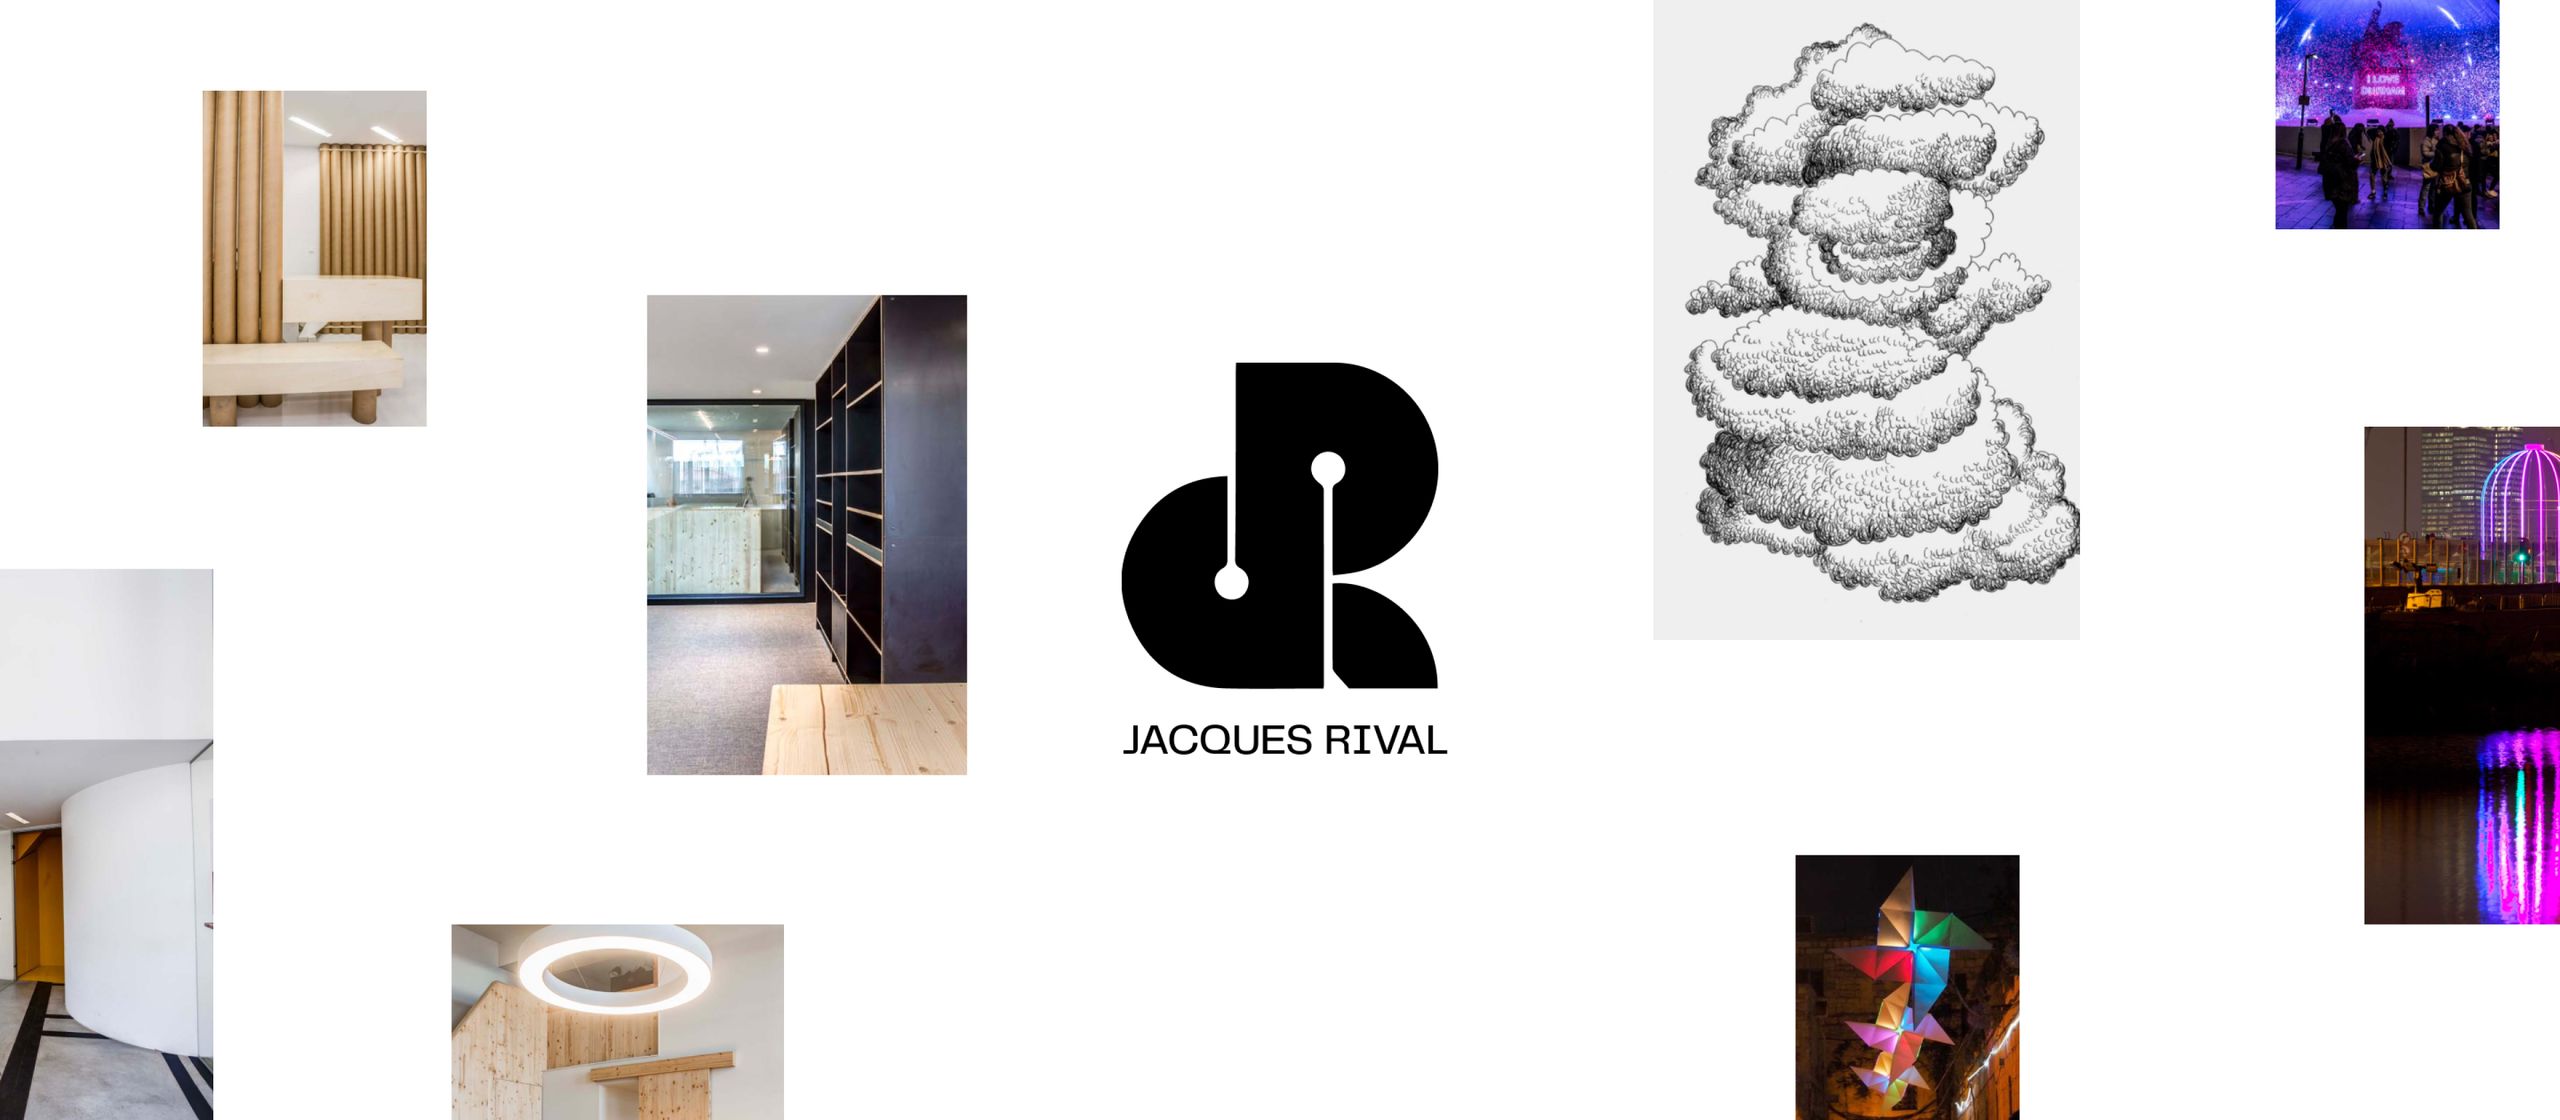 Jacques Rival - full screen image showcase website 